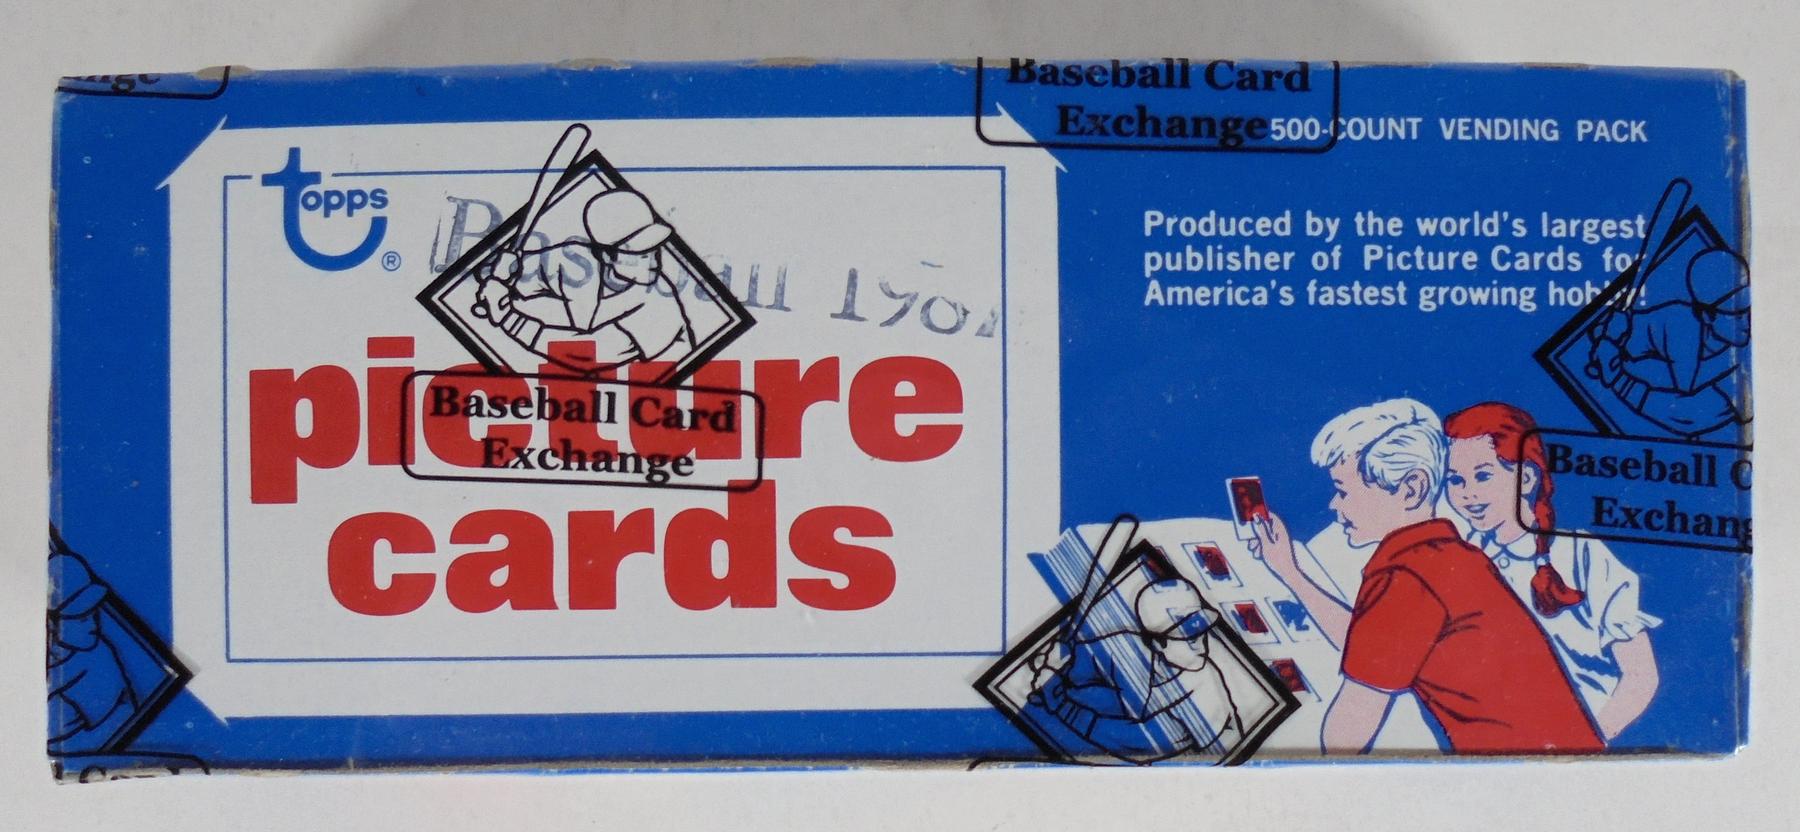 1987 Topps Baseball Checklist, Set Info, Key Cards, Boxes, Review